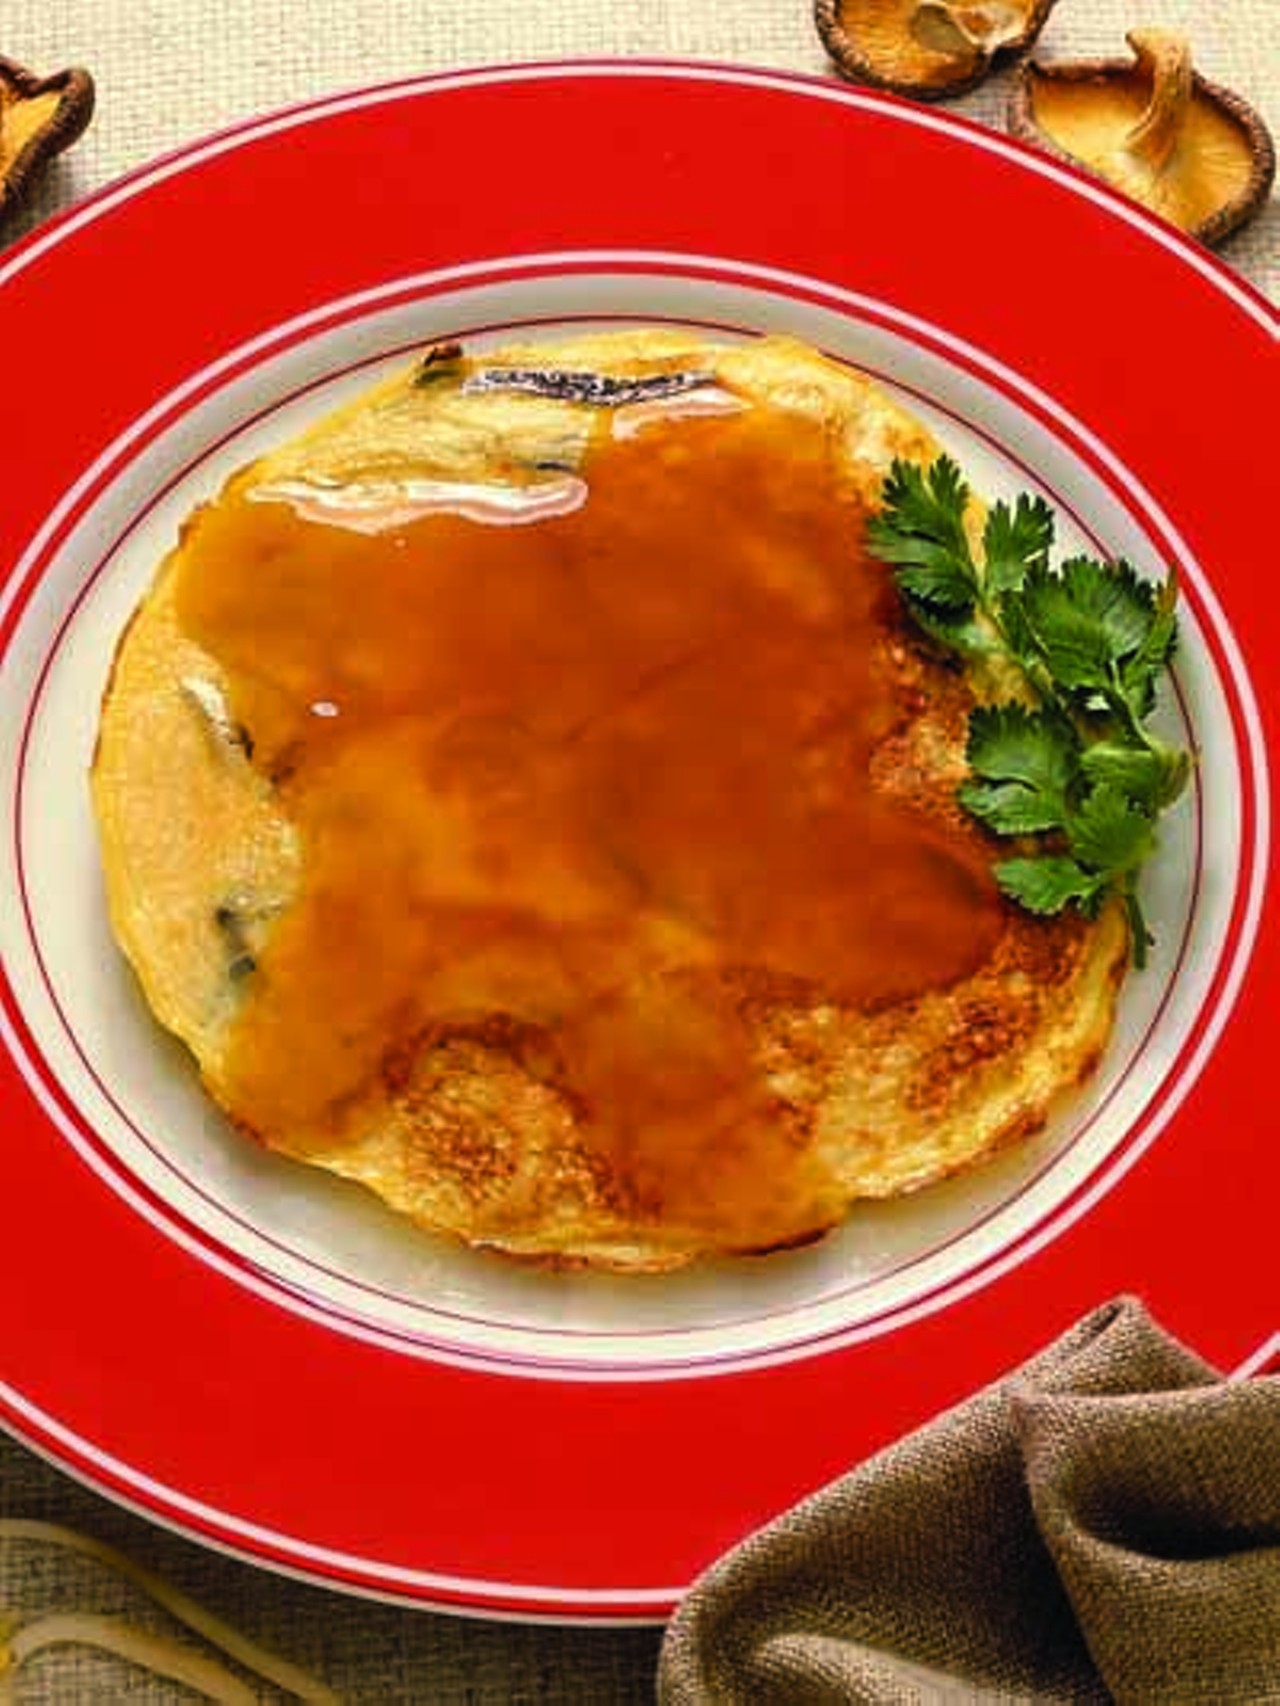 A recipe for eggs-cellent egg foo yung | Features | Creative Loafing ...